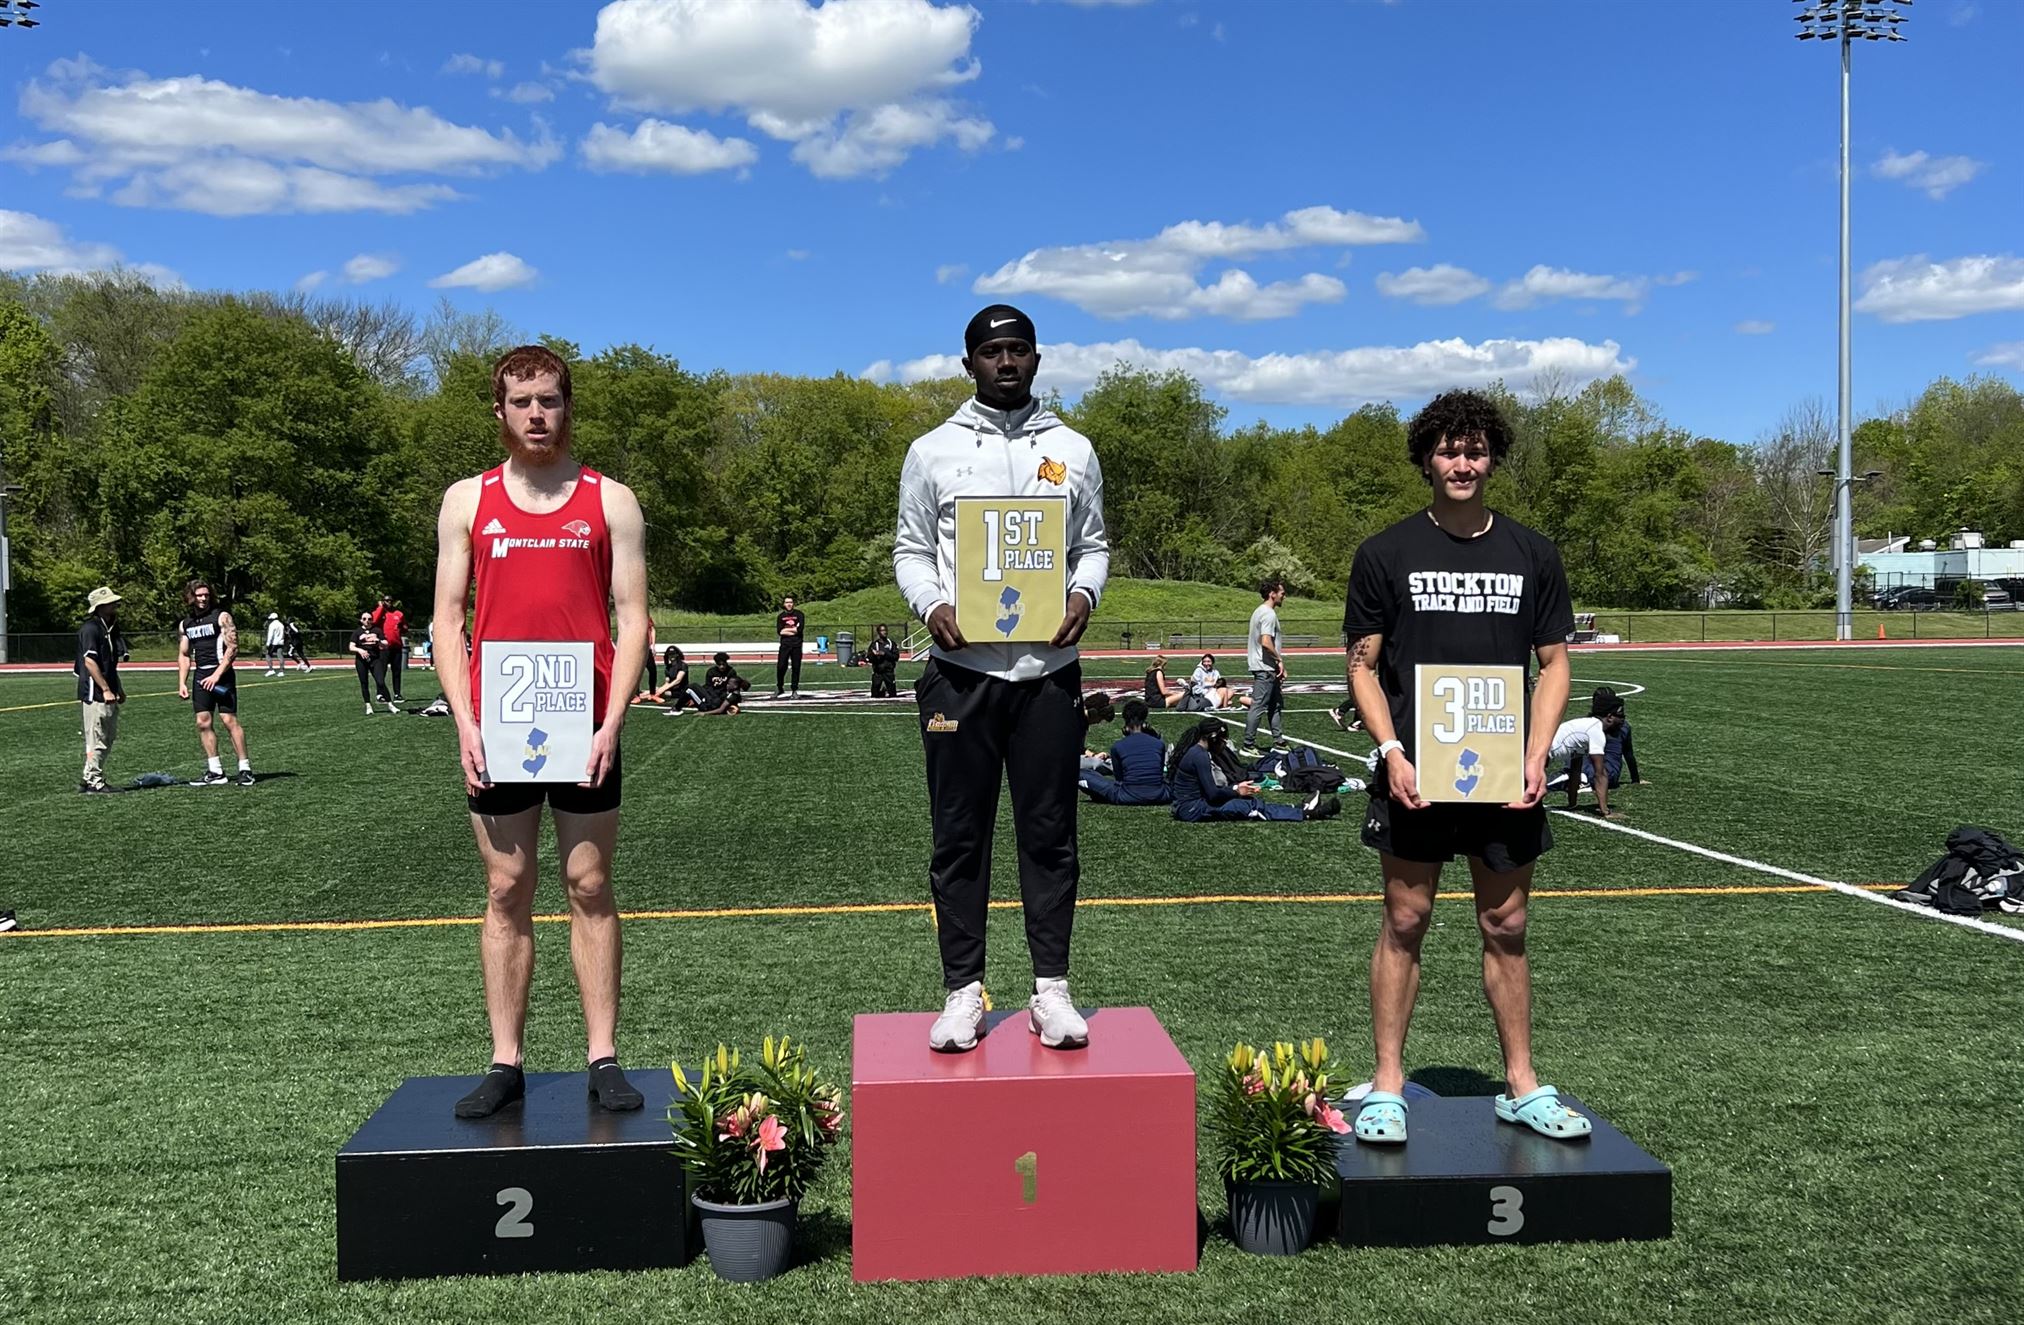 Graduate student Anthony Dimaulo on the podium for the long jump.